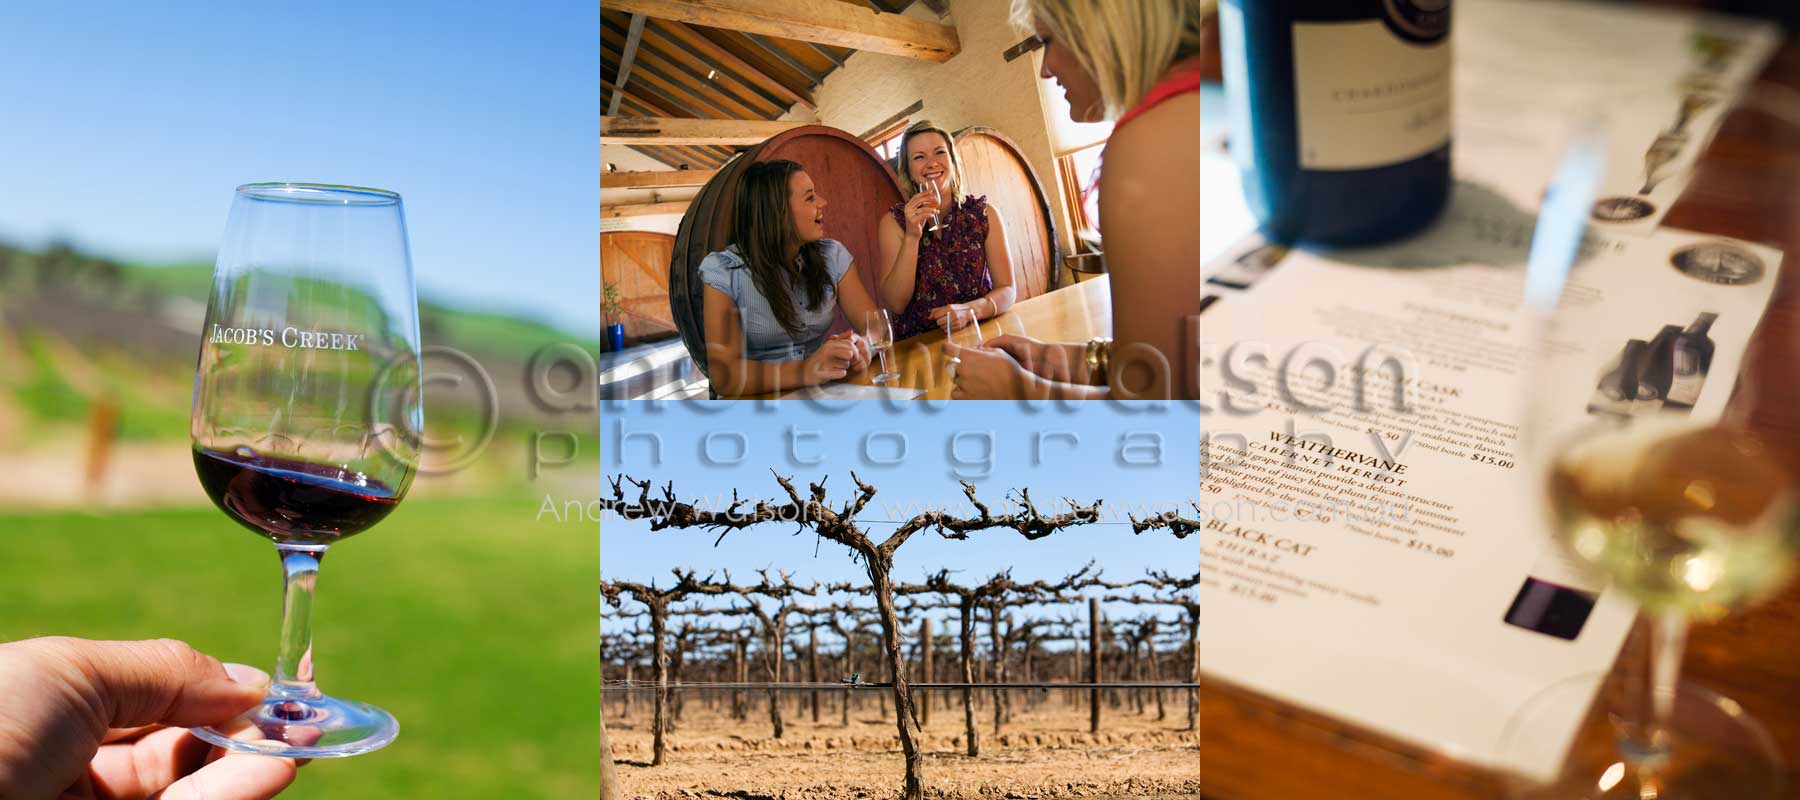 Lifestyle & Tourism Photography - Winery images from the renowned Barossa Valley wine region, Australia